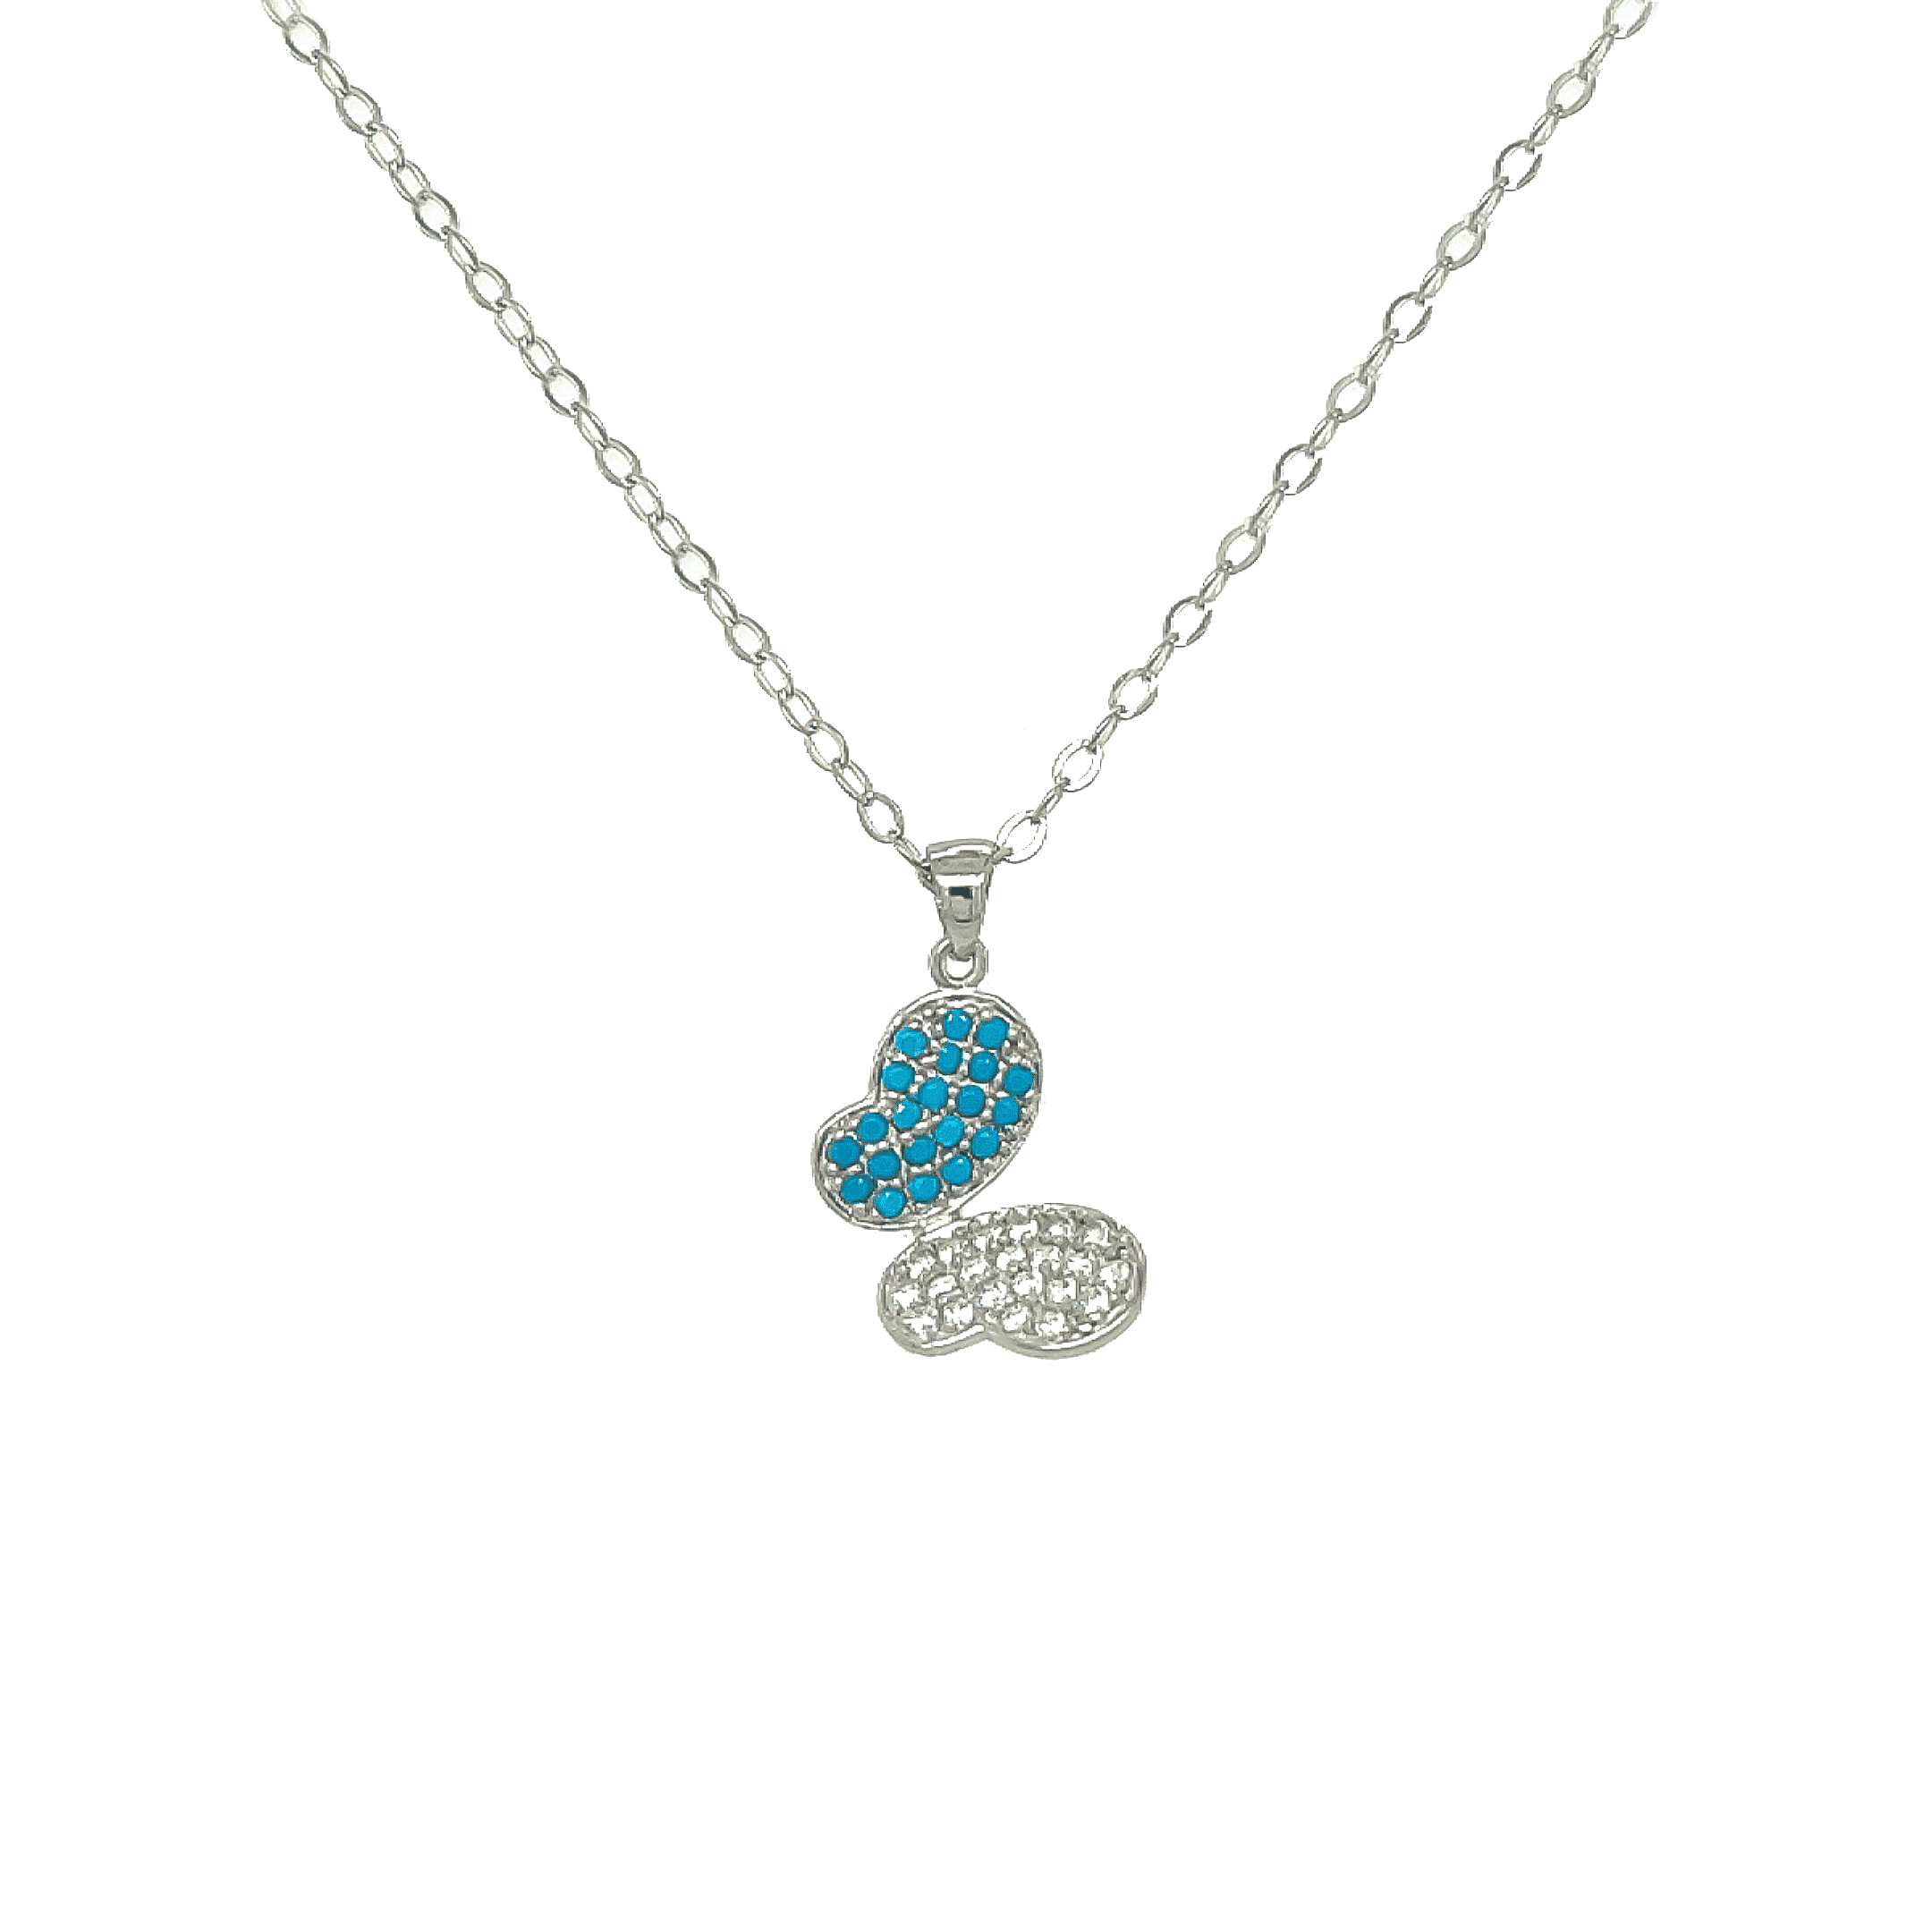 Asfour 925 Sterling Silver Necklace - NR0169